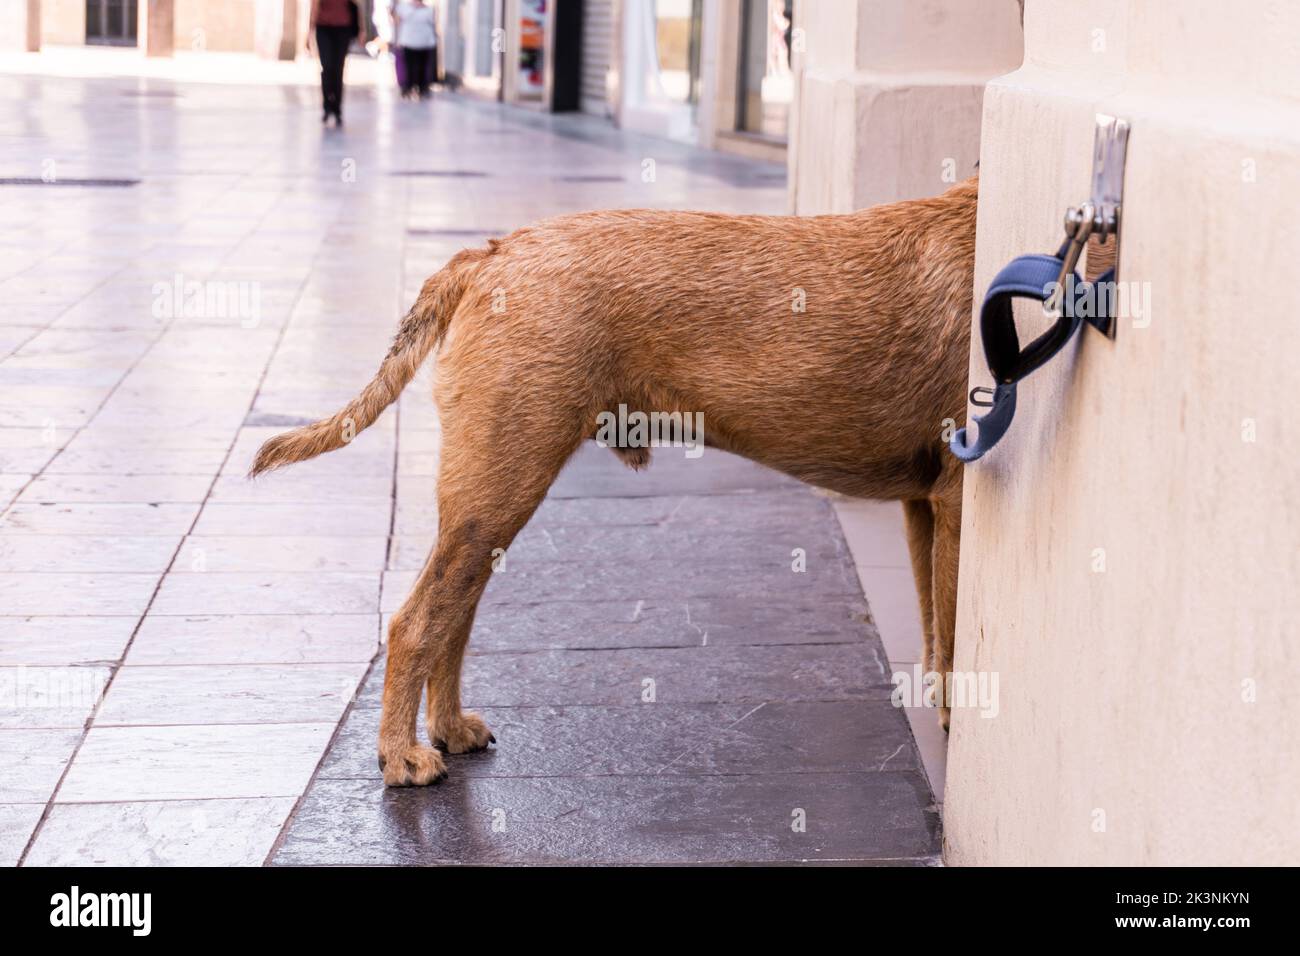 The body of an Irish Terrier dog standing behind a wall on tiled floor Stock Photo